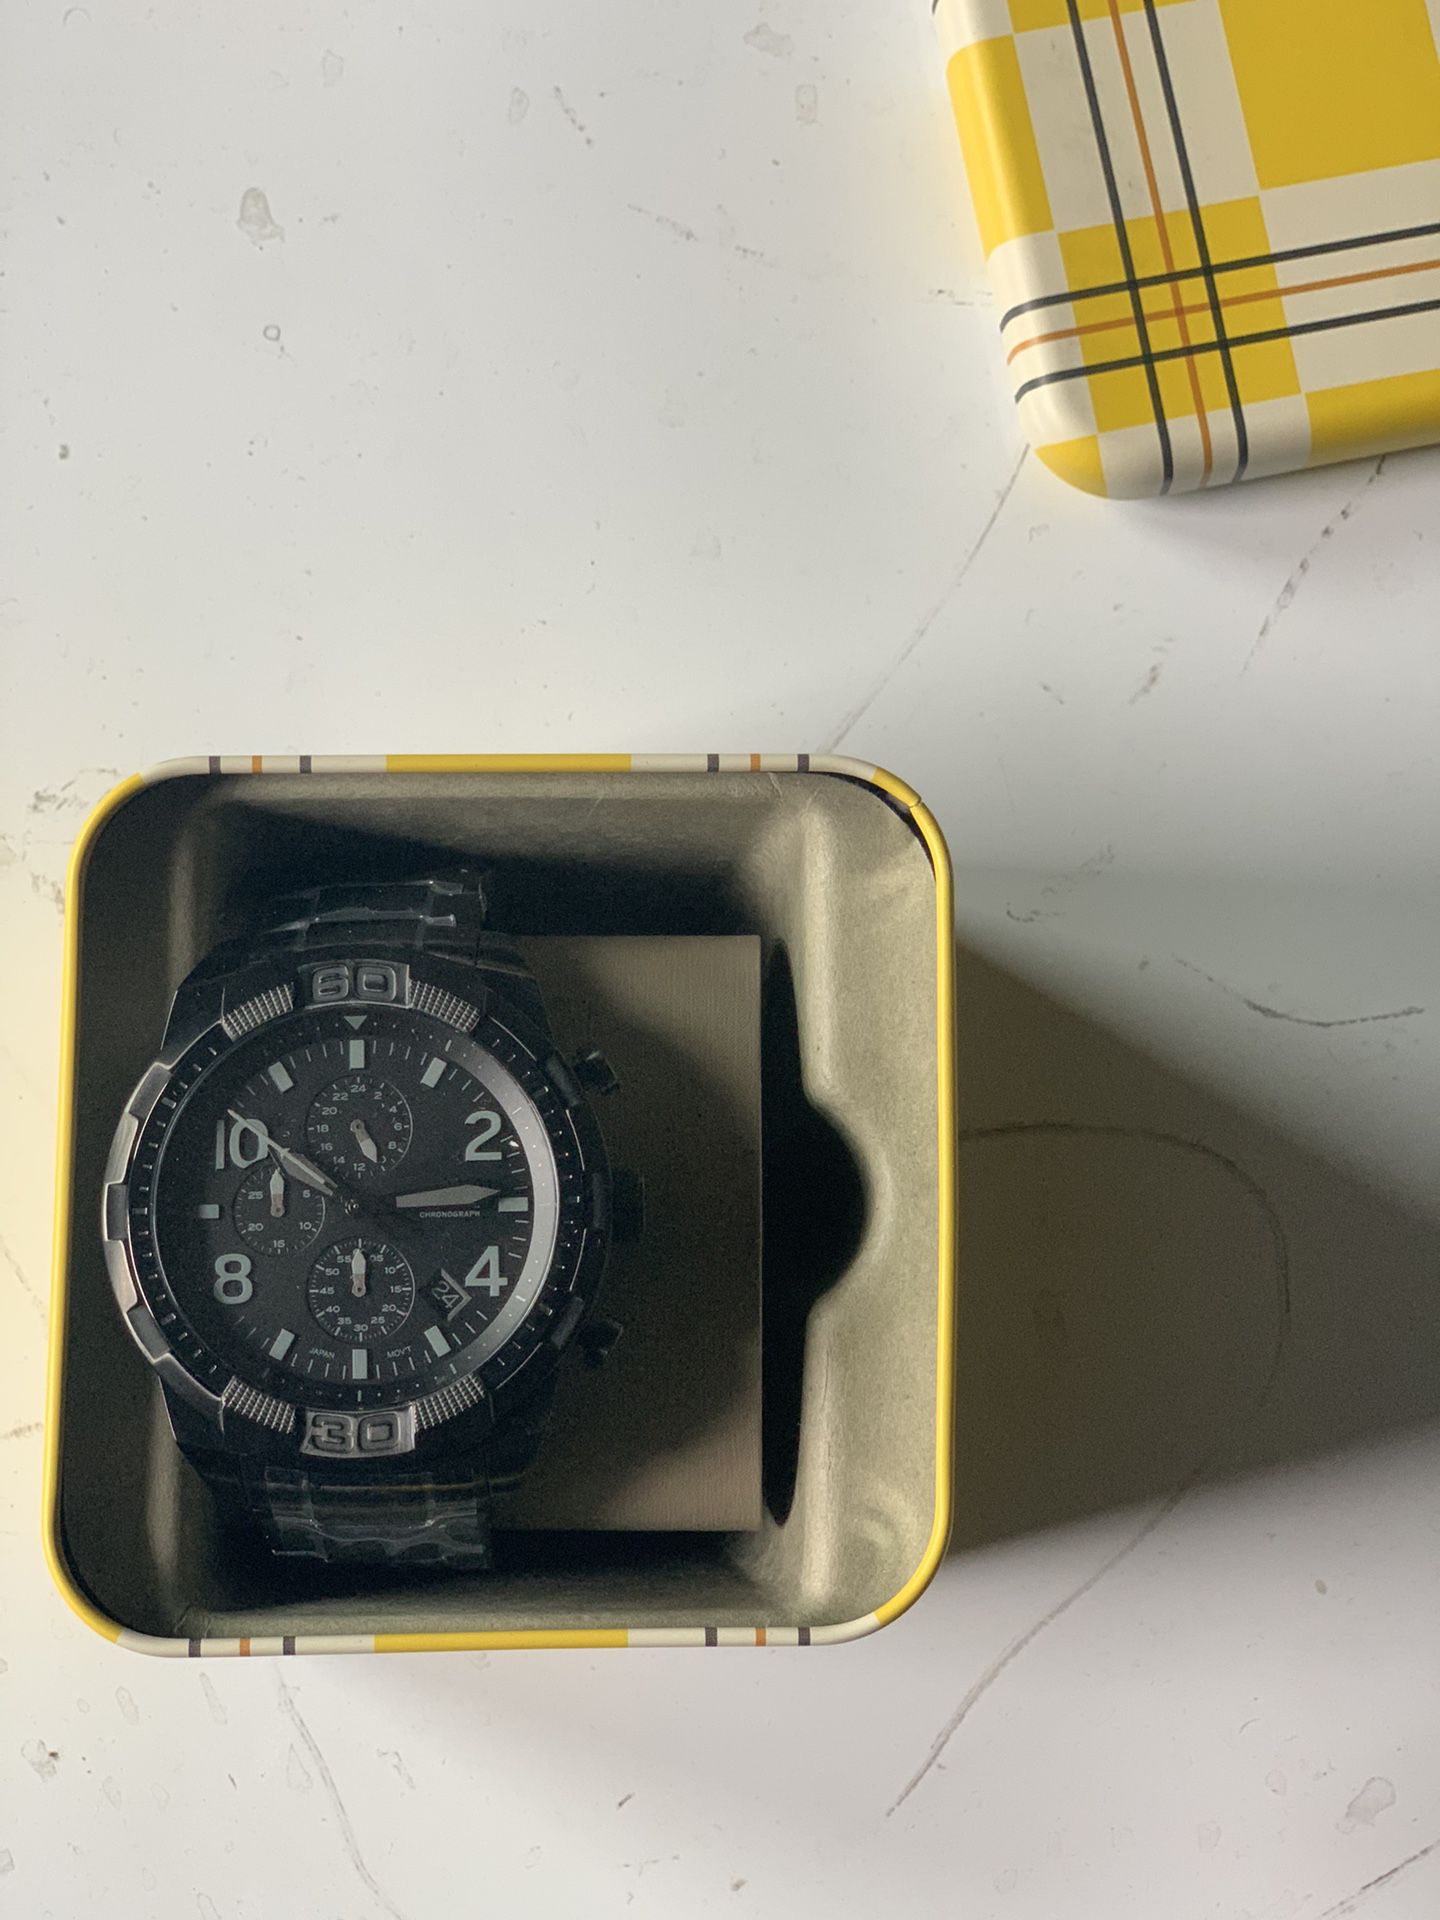 Fossil Chronograph Wacth For $100